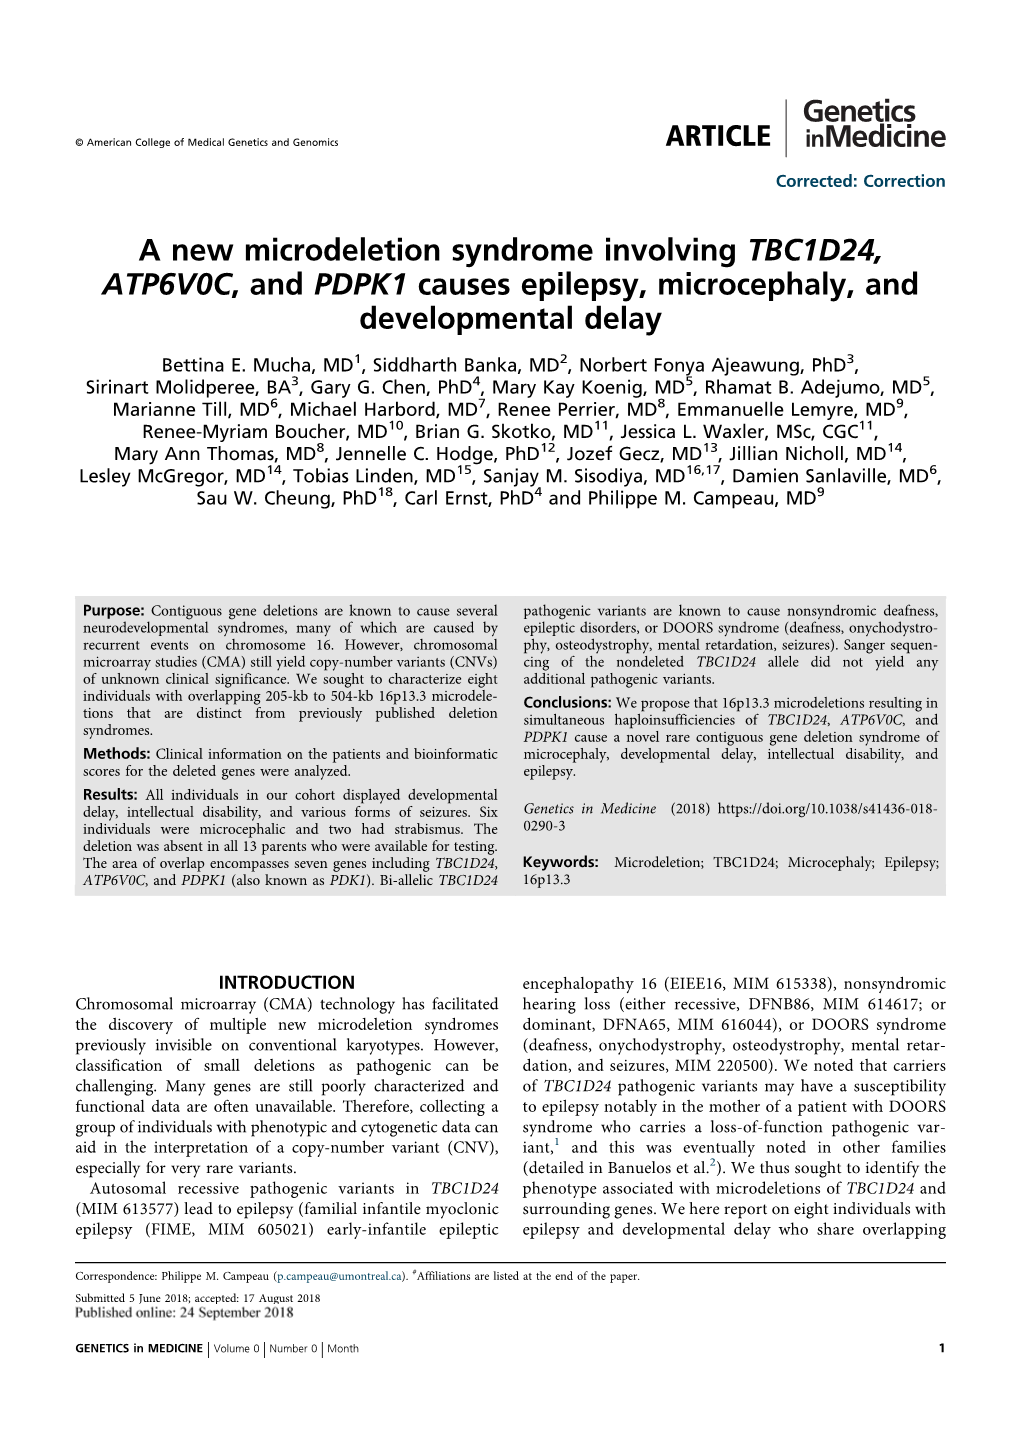 A New Microdeletion Syndrome Involving TBC1D24, ATP6V0C, and PDPK1 Causes Epilepsy, Microcephaly, and Developmental Delay